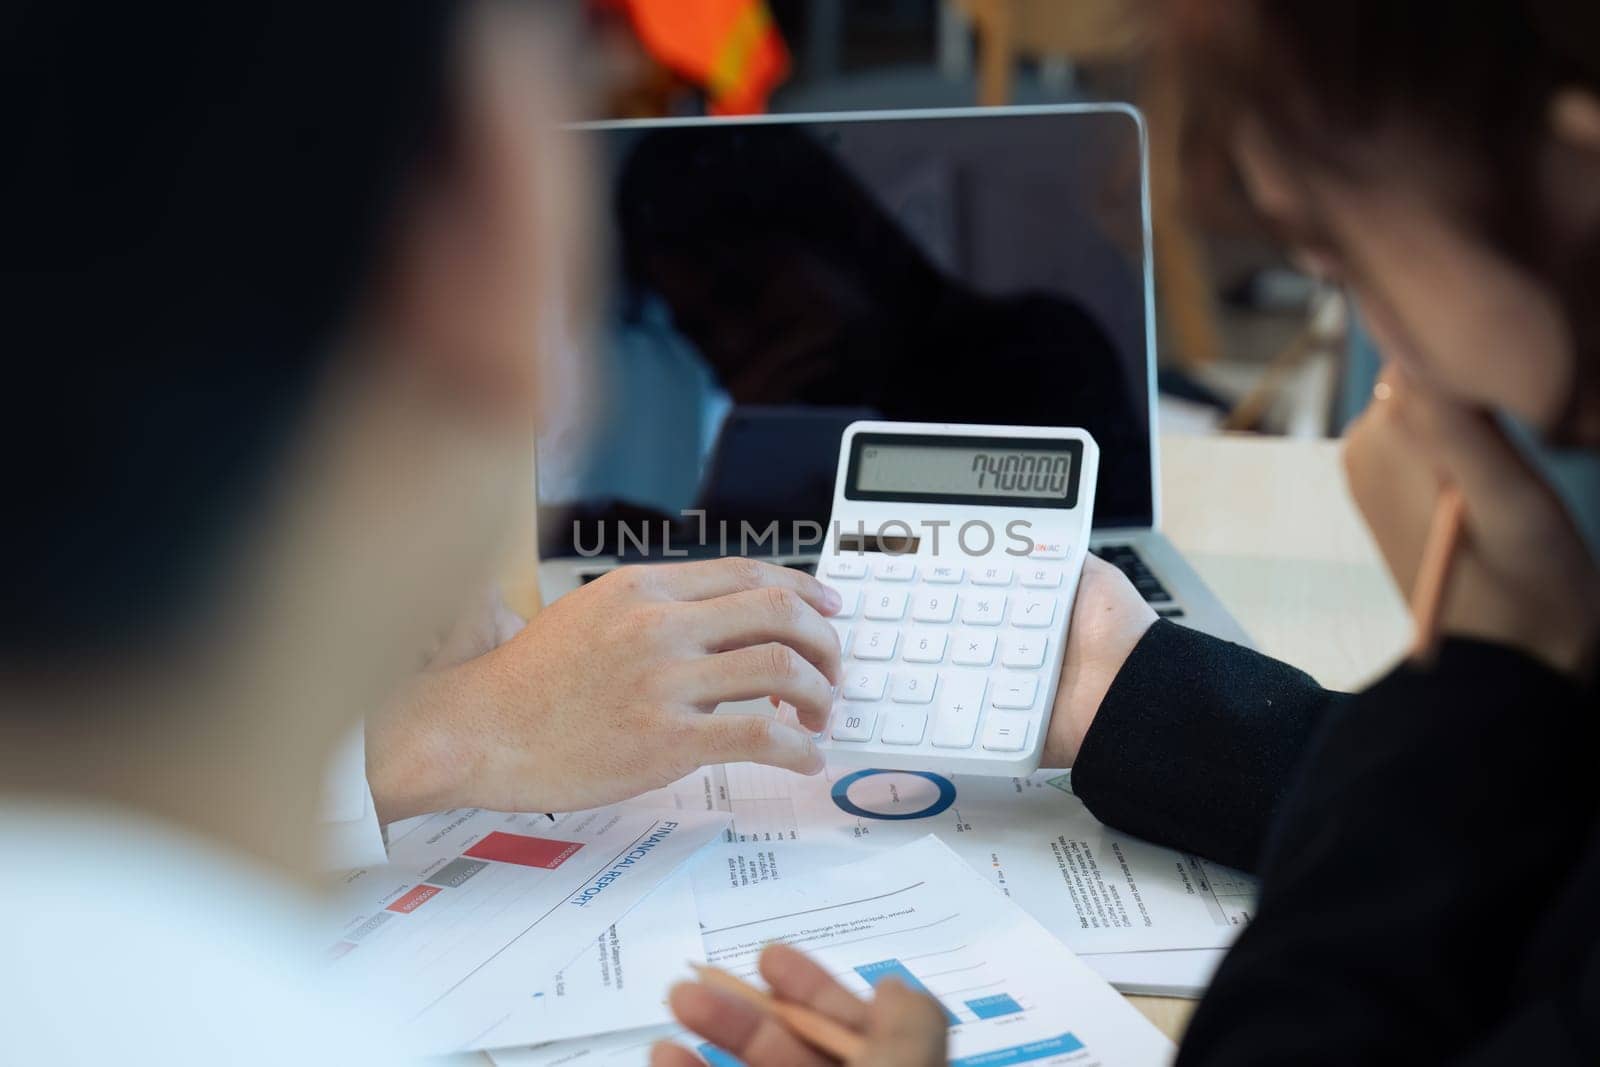 Businesswoman using a calculator to calculate numbers on a company's financial documents, analyzing historical financial data to plan how to grow the company. Financial concept. by itchaznong